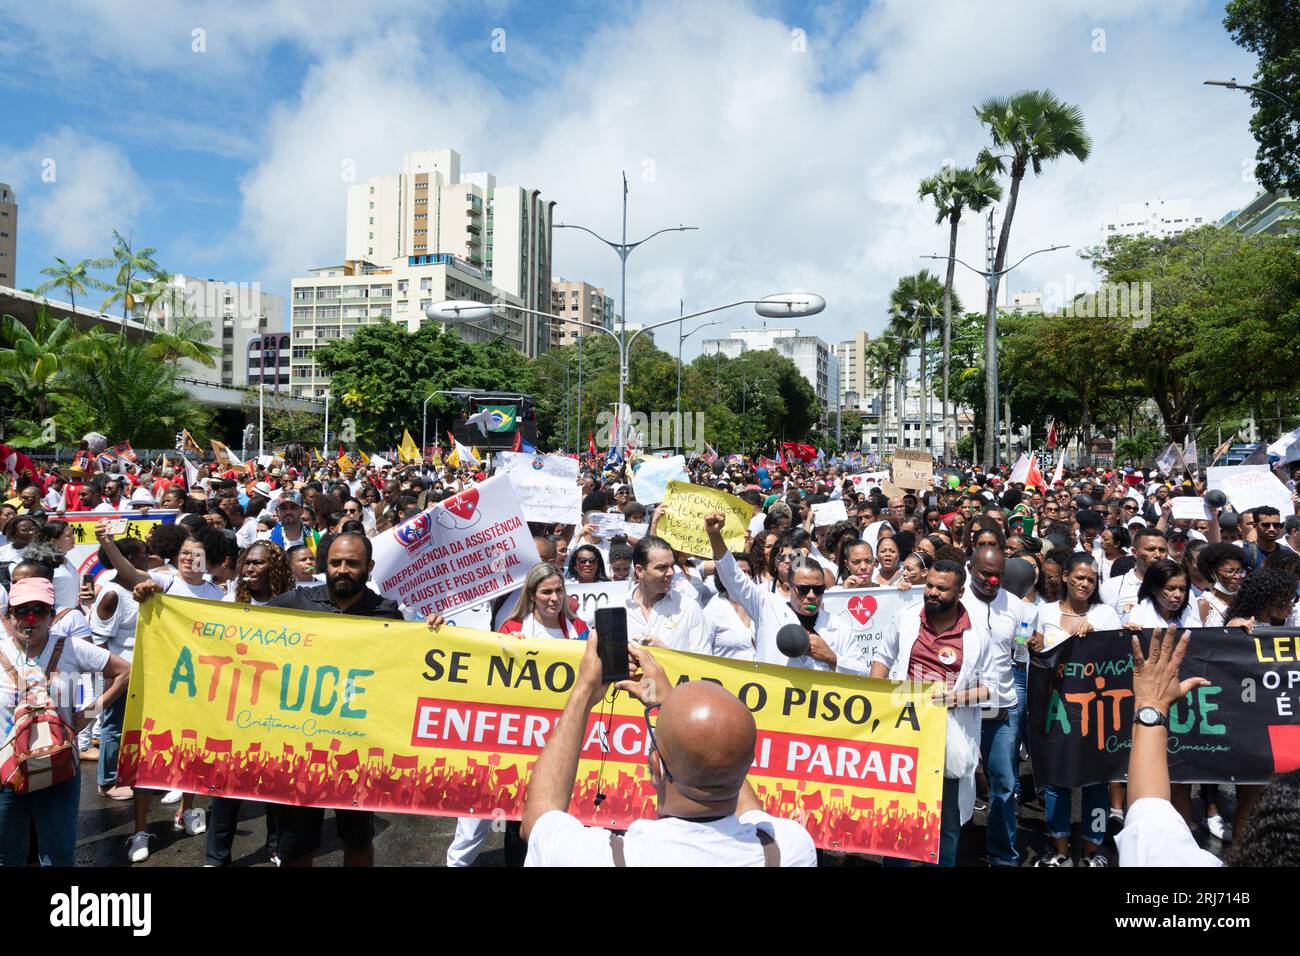 Salvador, Bahia, Brazil - September 07, 2022: Nurses are seen protesting during the Brazilian independence parade in the city of Salvador. Stock Photo